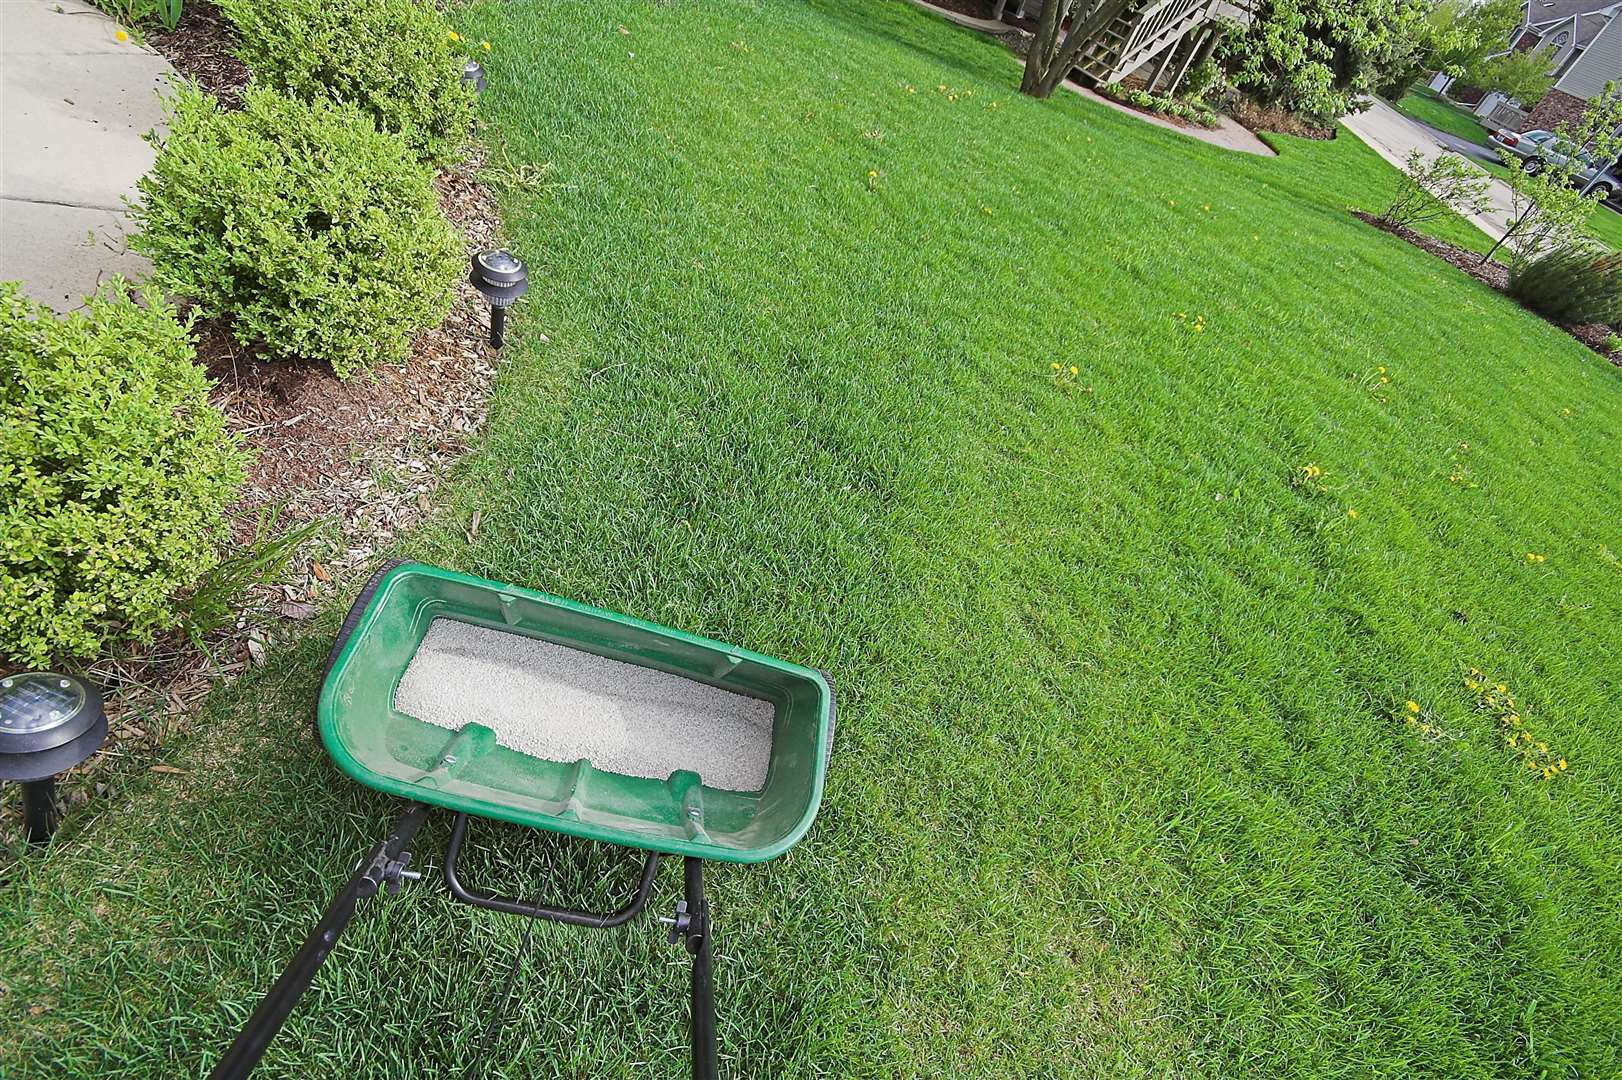 For best results, feed your lawn.